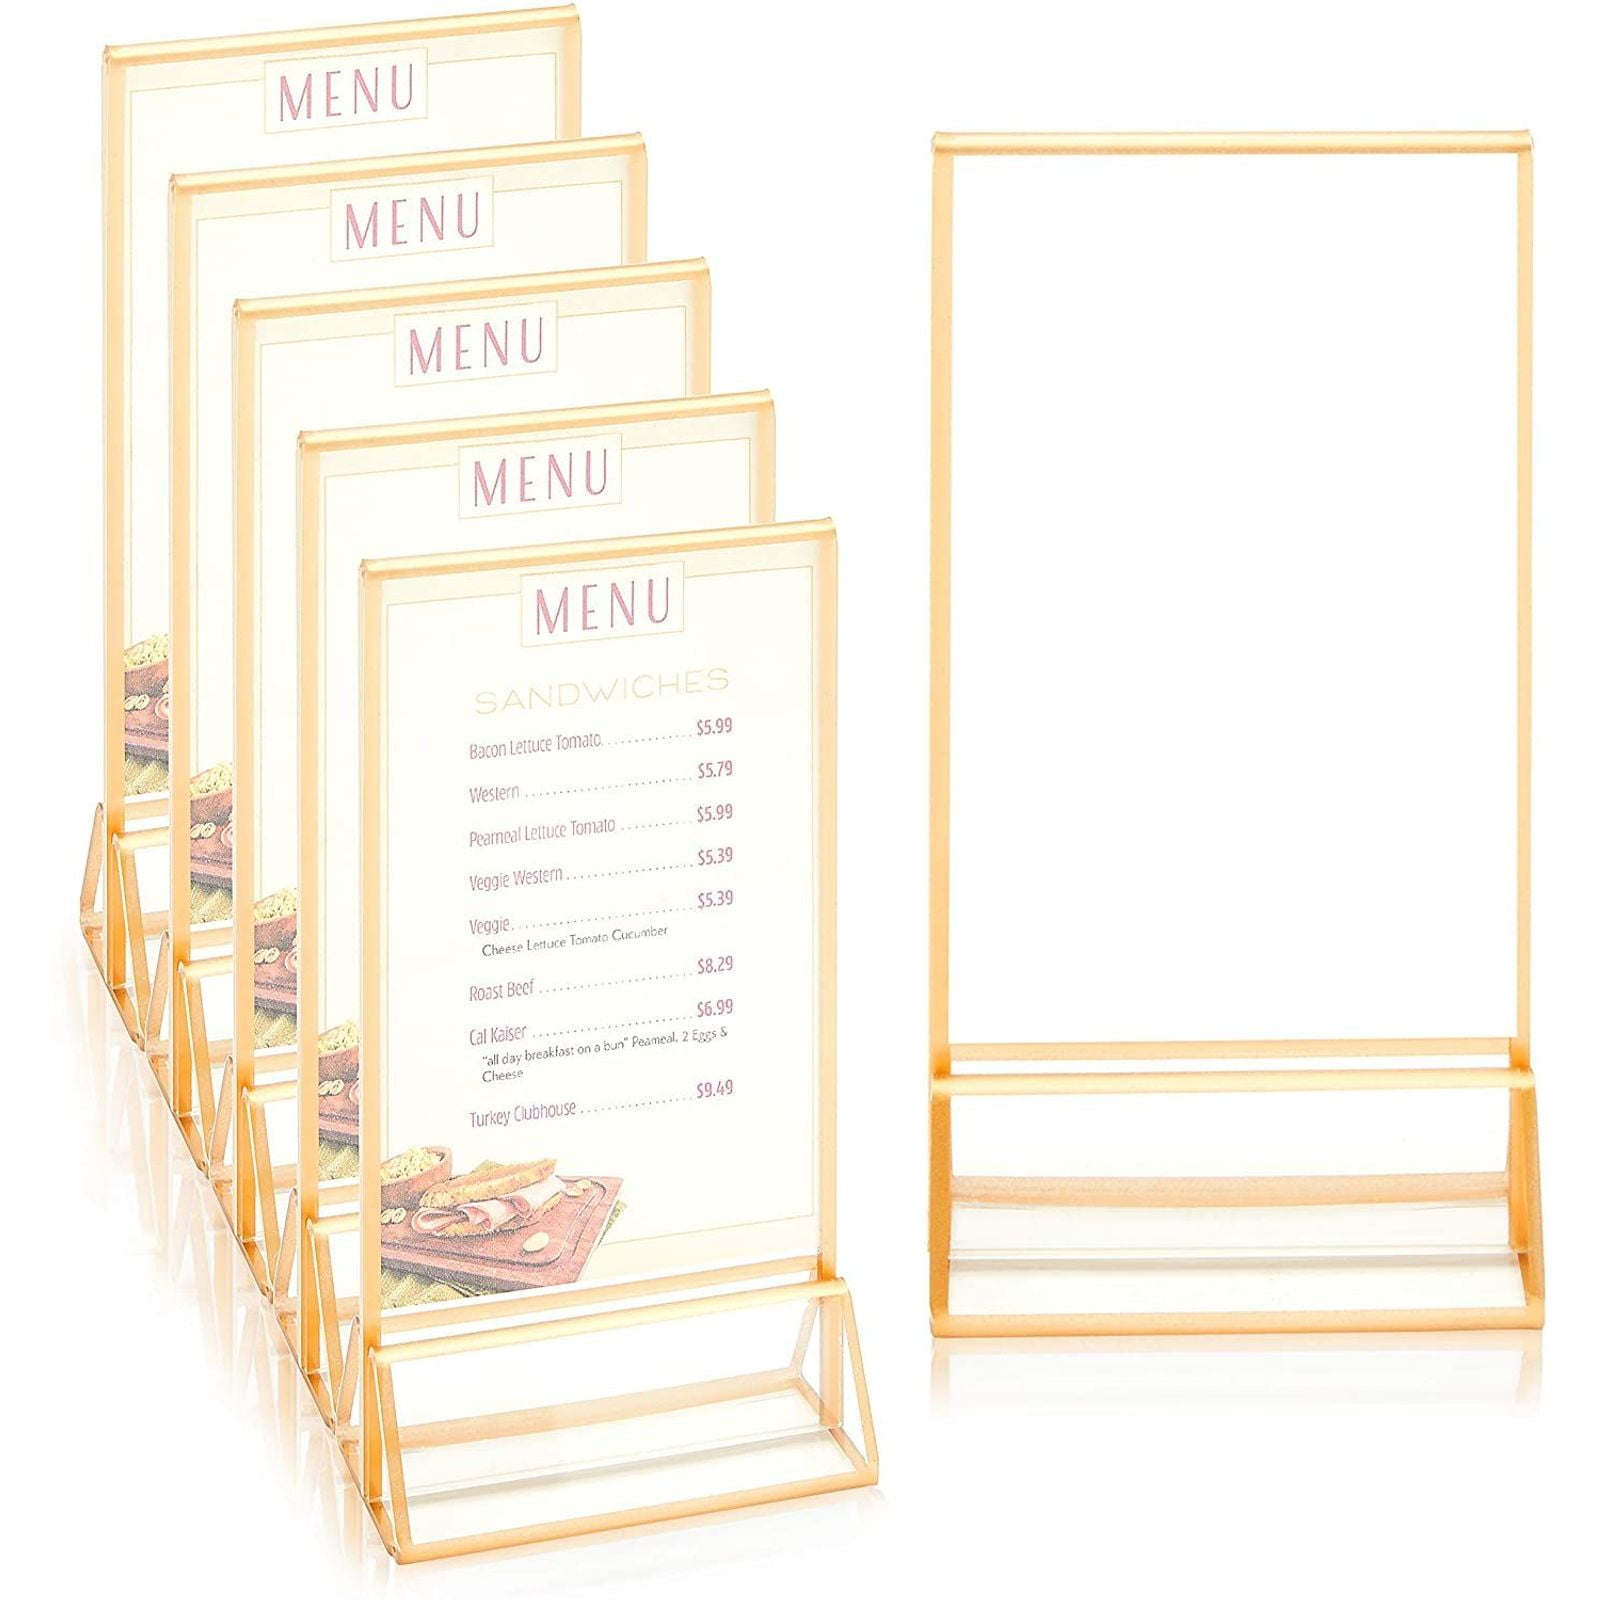 4”W x 9”H Clear Acrylic Double-sided Table Sign Holder Table Tent Lot of 12 